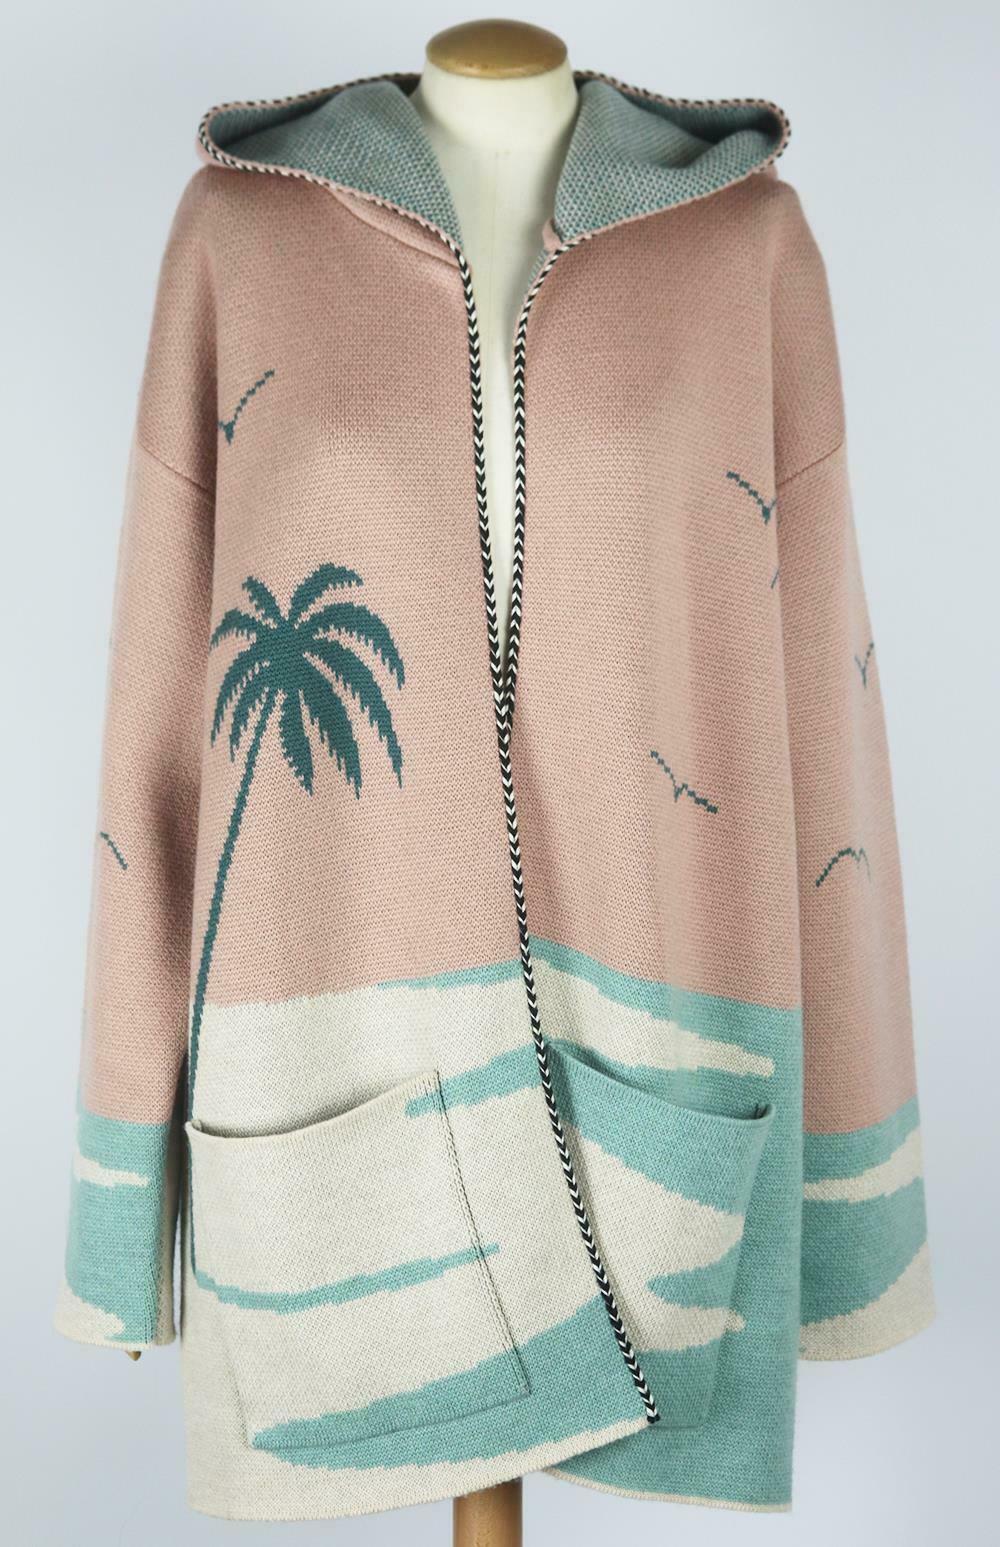 Each one of Alanui's cardigans is a true mark of craftsmanship - this hooded version took four hours just to knit and another five to assemble, made in Italy from six different colored yarns, it has a relaxed silhouette and is jacquard-woven with a